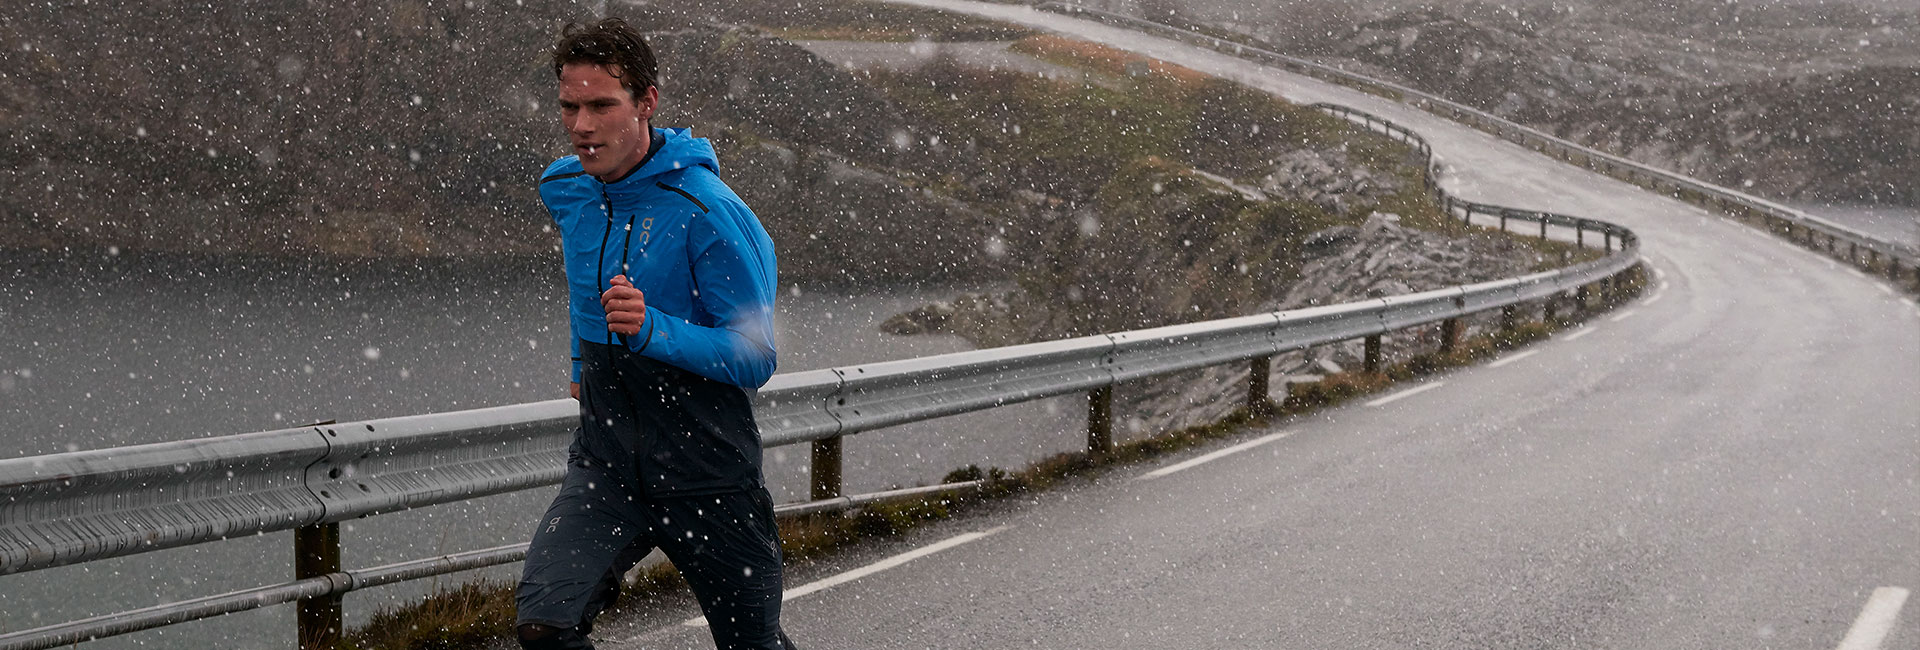 This Compression Shirt Is a Winter Run Must-have